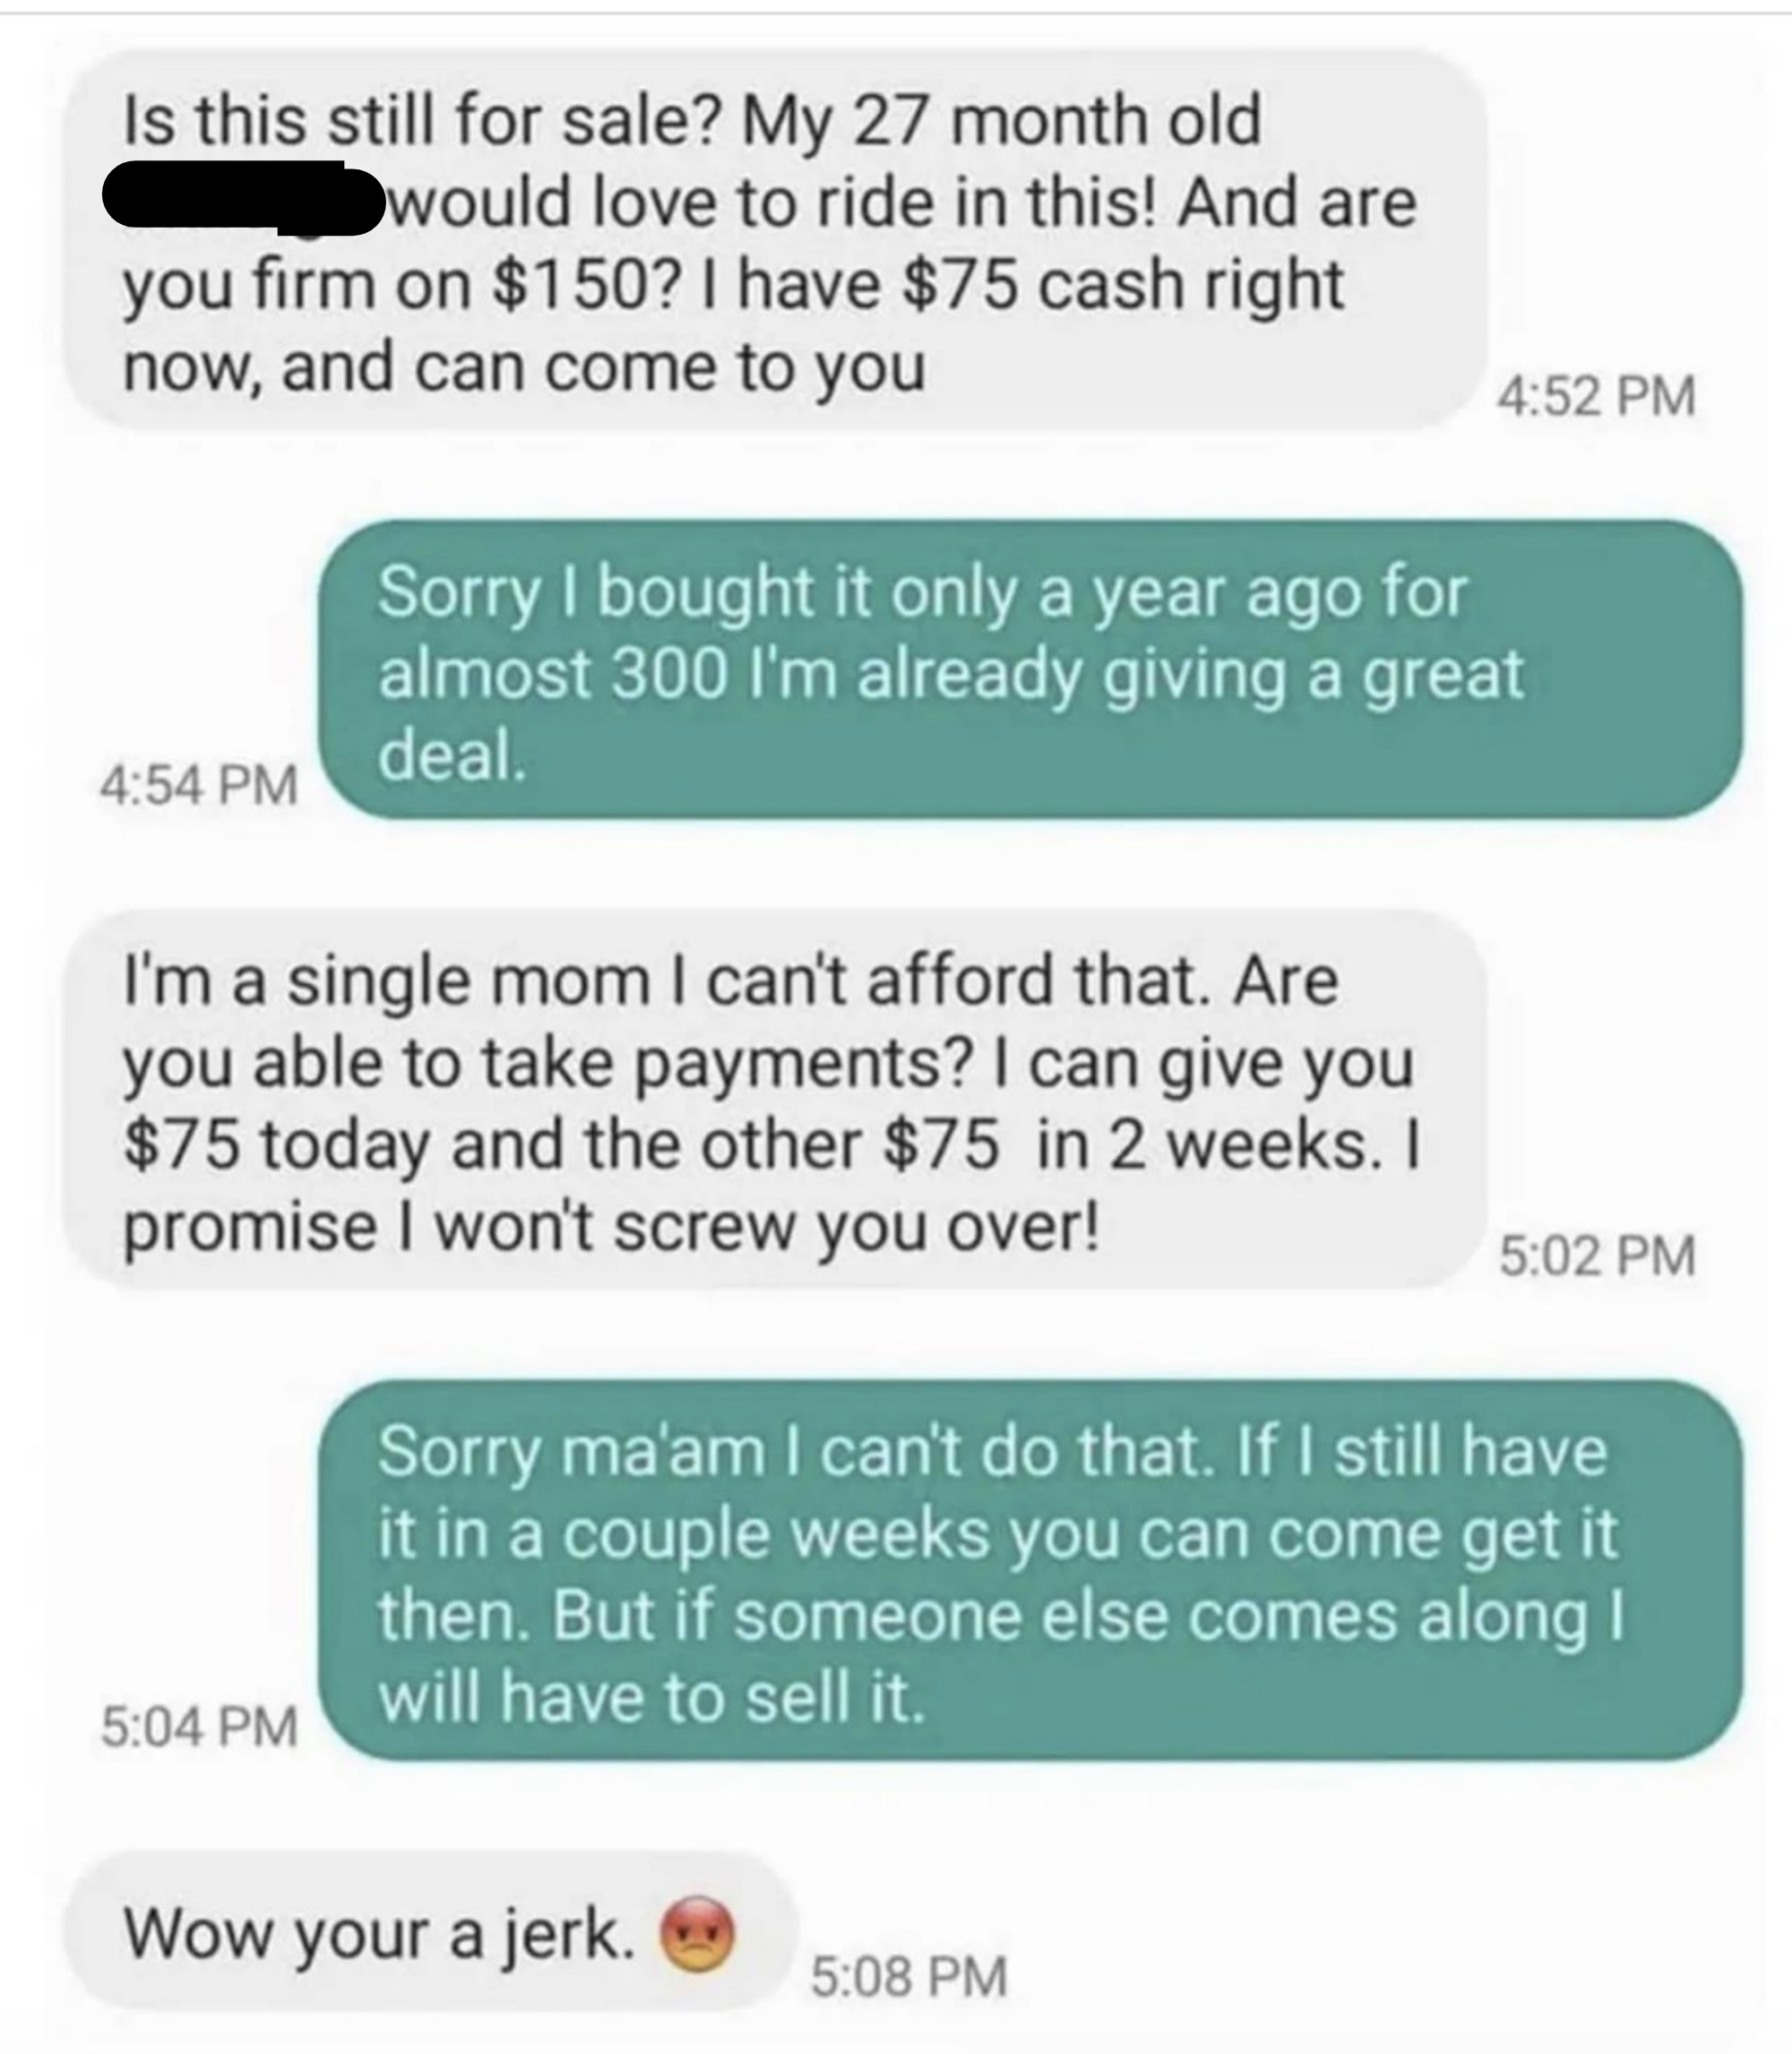 Single mom offers $75 for a gift for her child, person wants $150, she says she can give $75 today and $75 in 2 weeks, person says if it&#x27;s available in a few weeks, OK, but if someone makes an offer before then, they&#x27;ll sell it, and she calls them a jerk